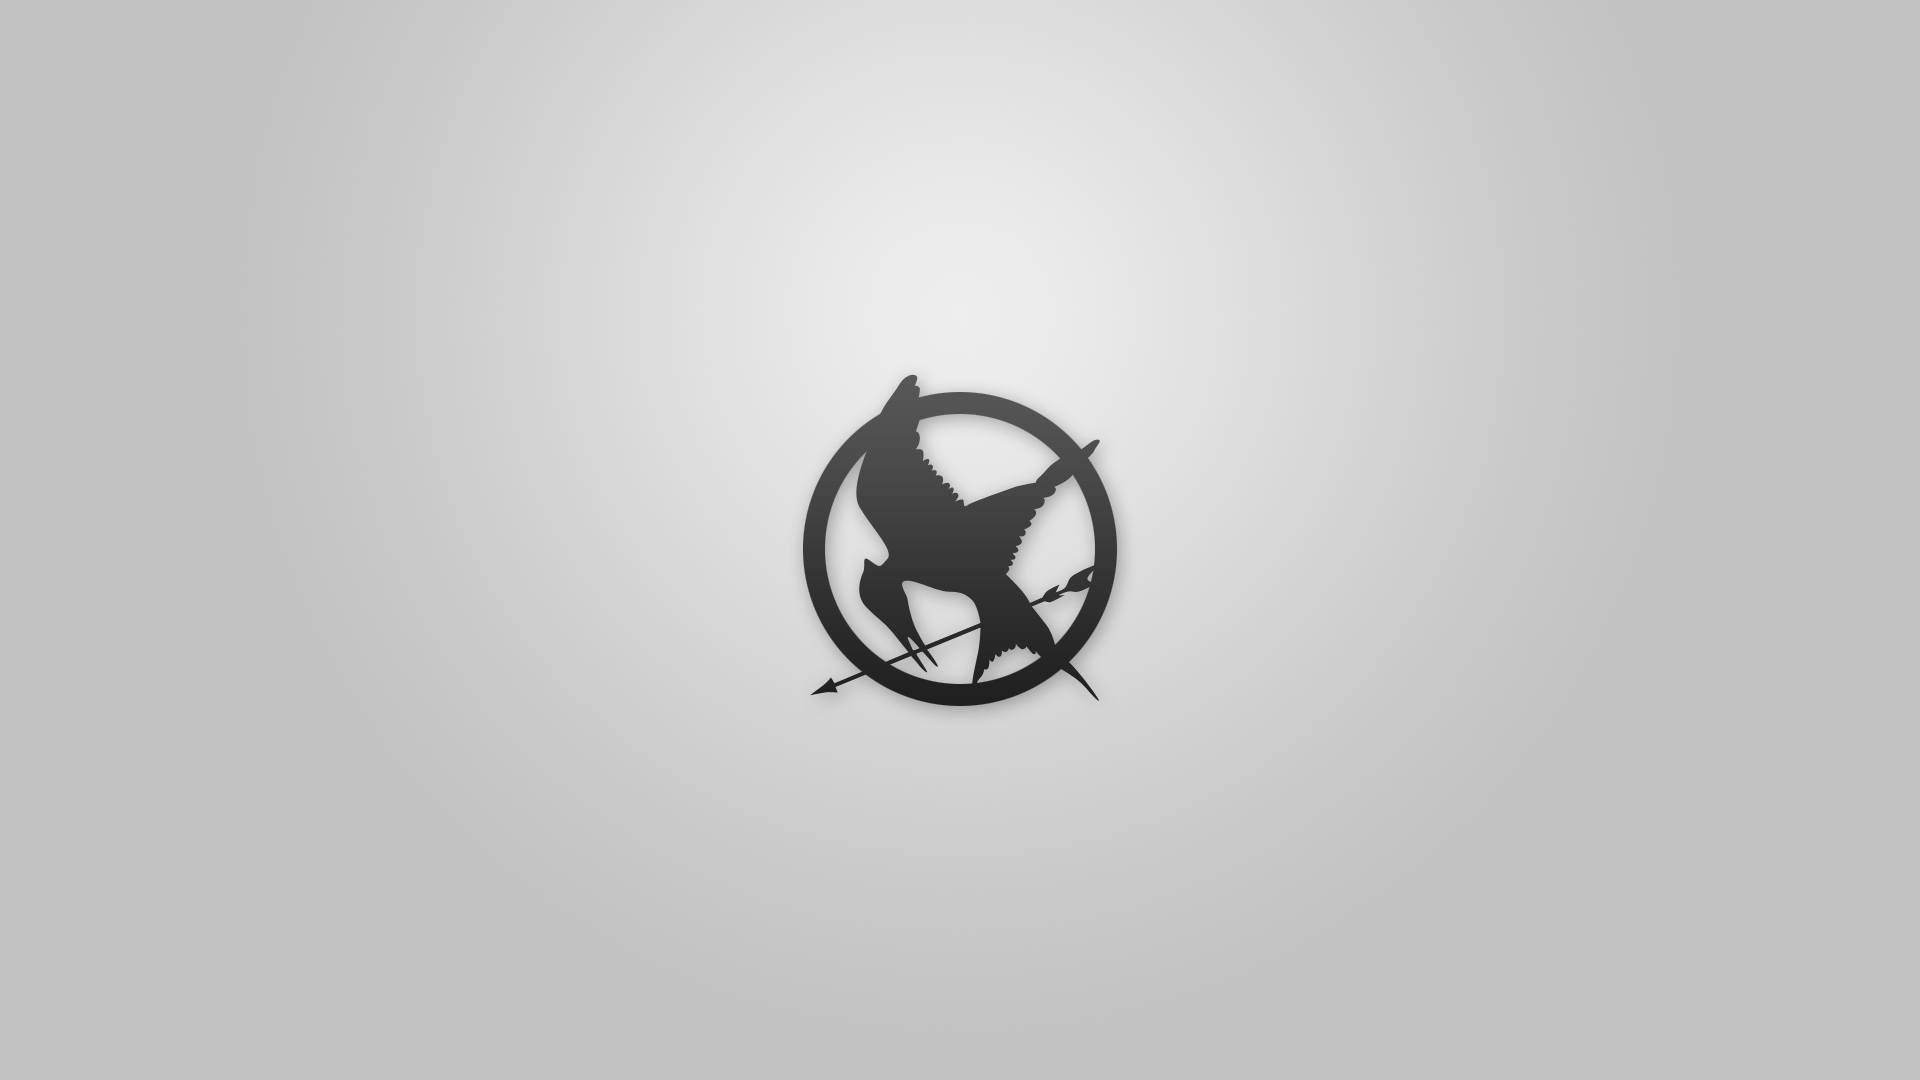  Wallpaper 1920x1080 Minimalistic Gray Pin The Hunger Games